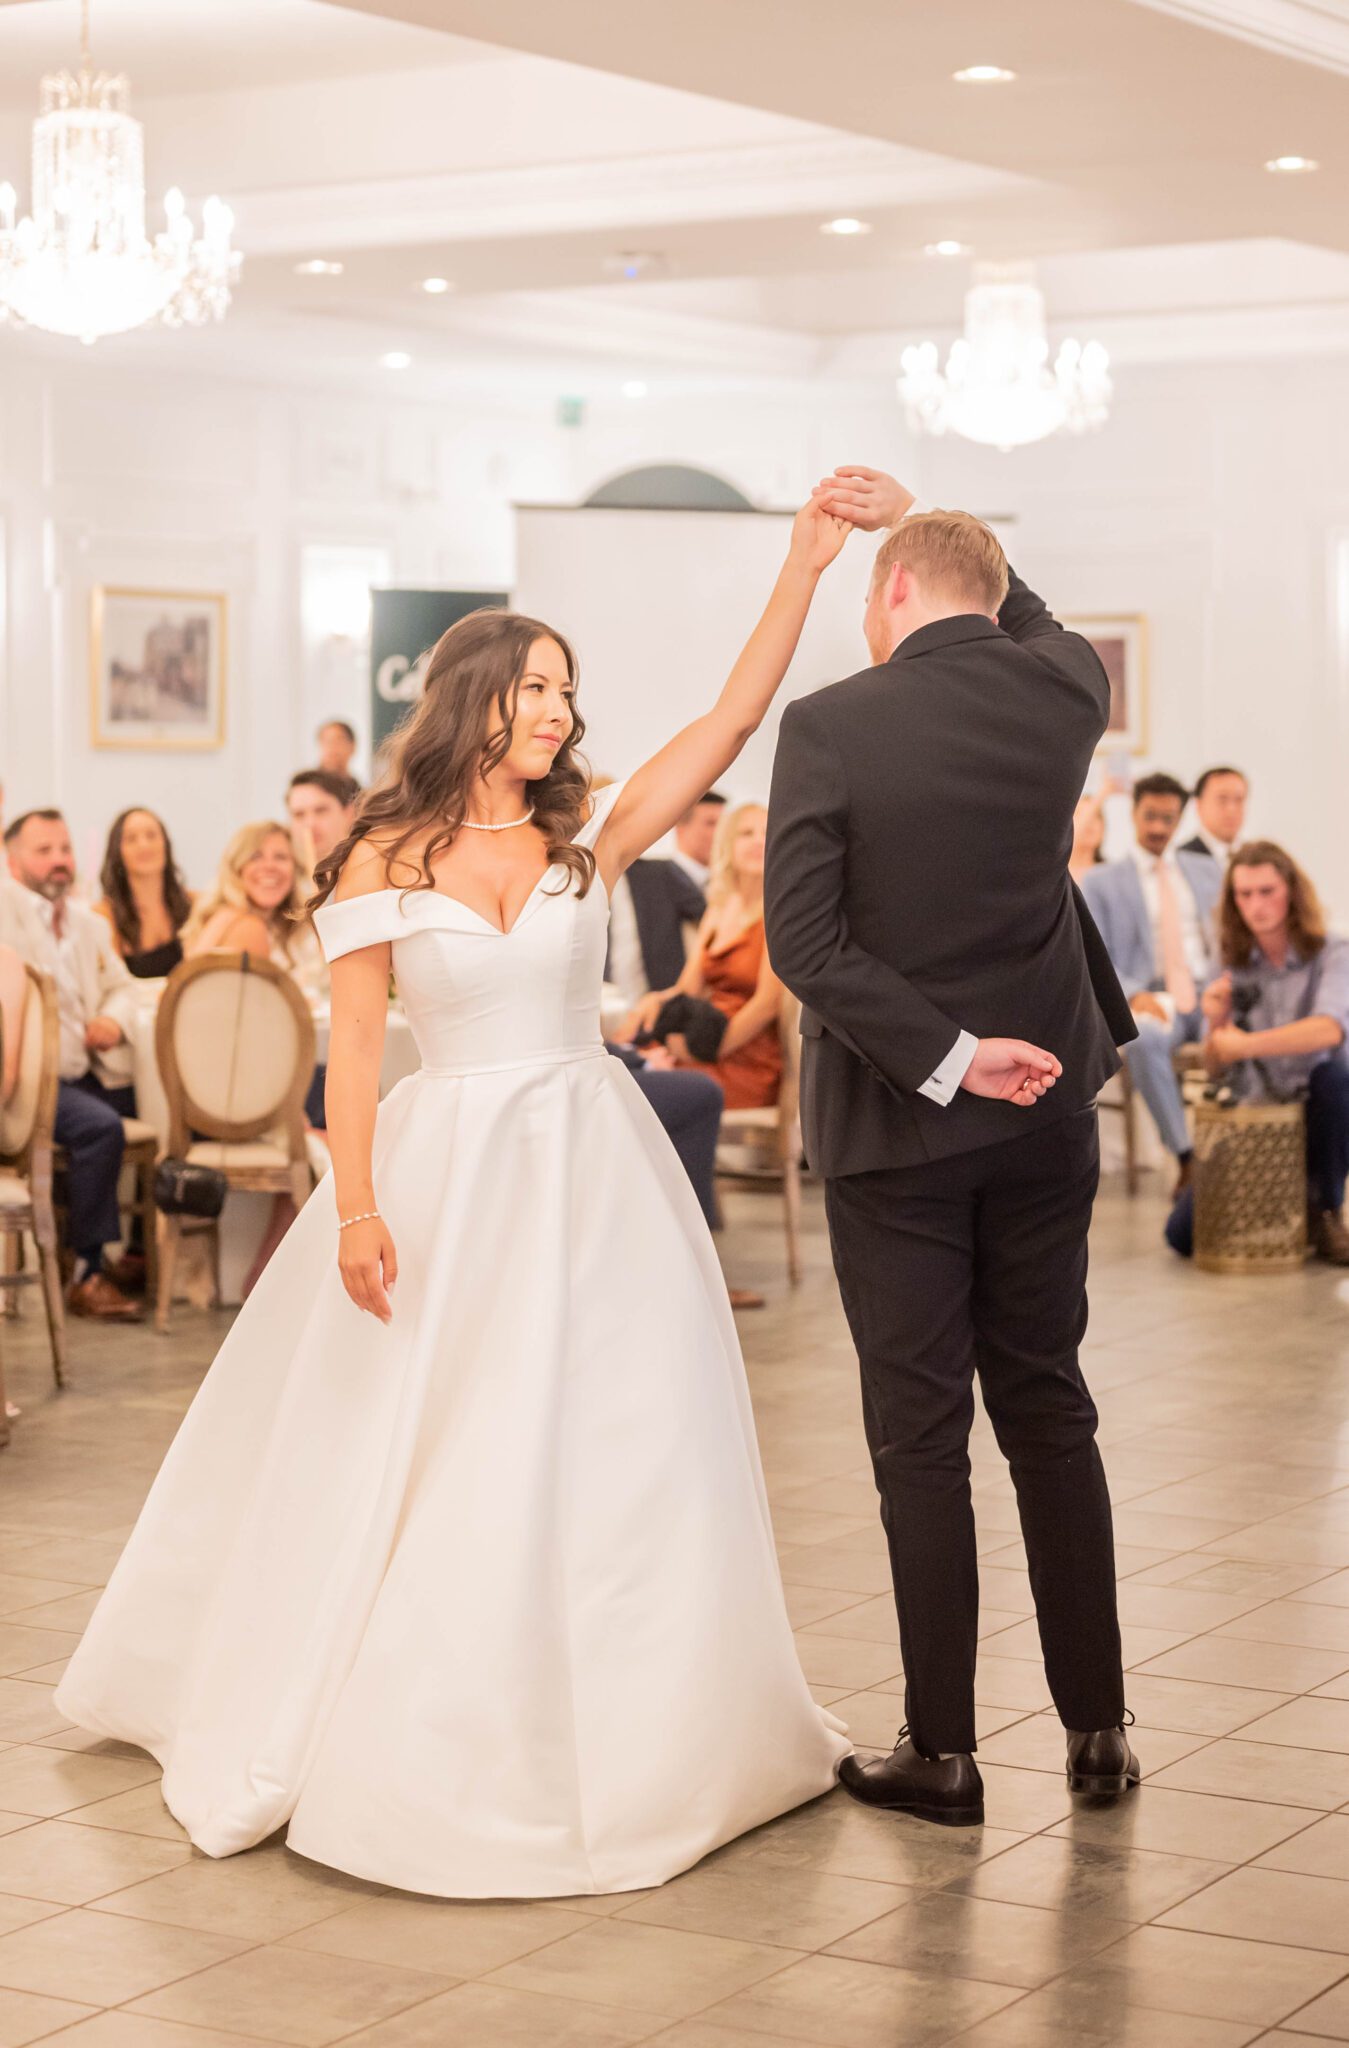 Couple shares their first dance as newlyweds at their garden party wedding reception at Spruce Meadows, bride wearing elegant gown with off the shoulder sleeves and sweetheart neckline.